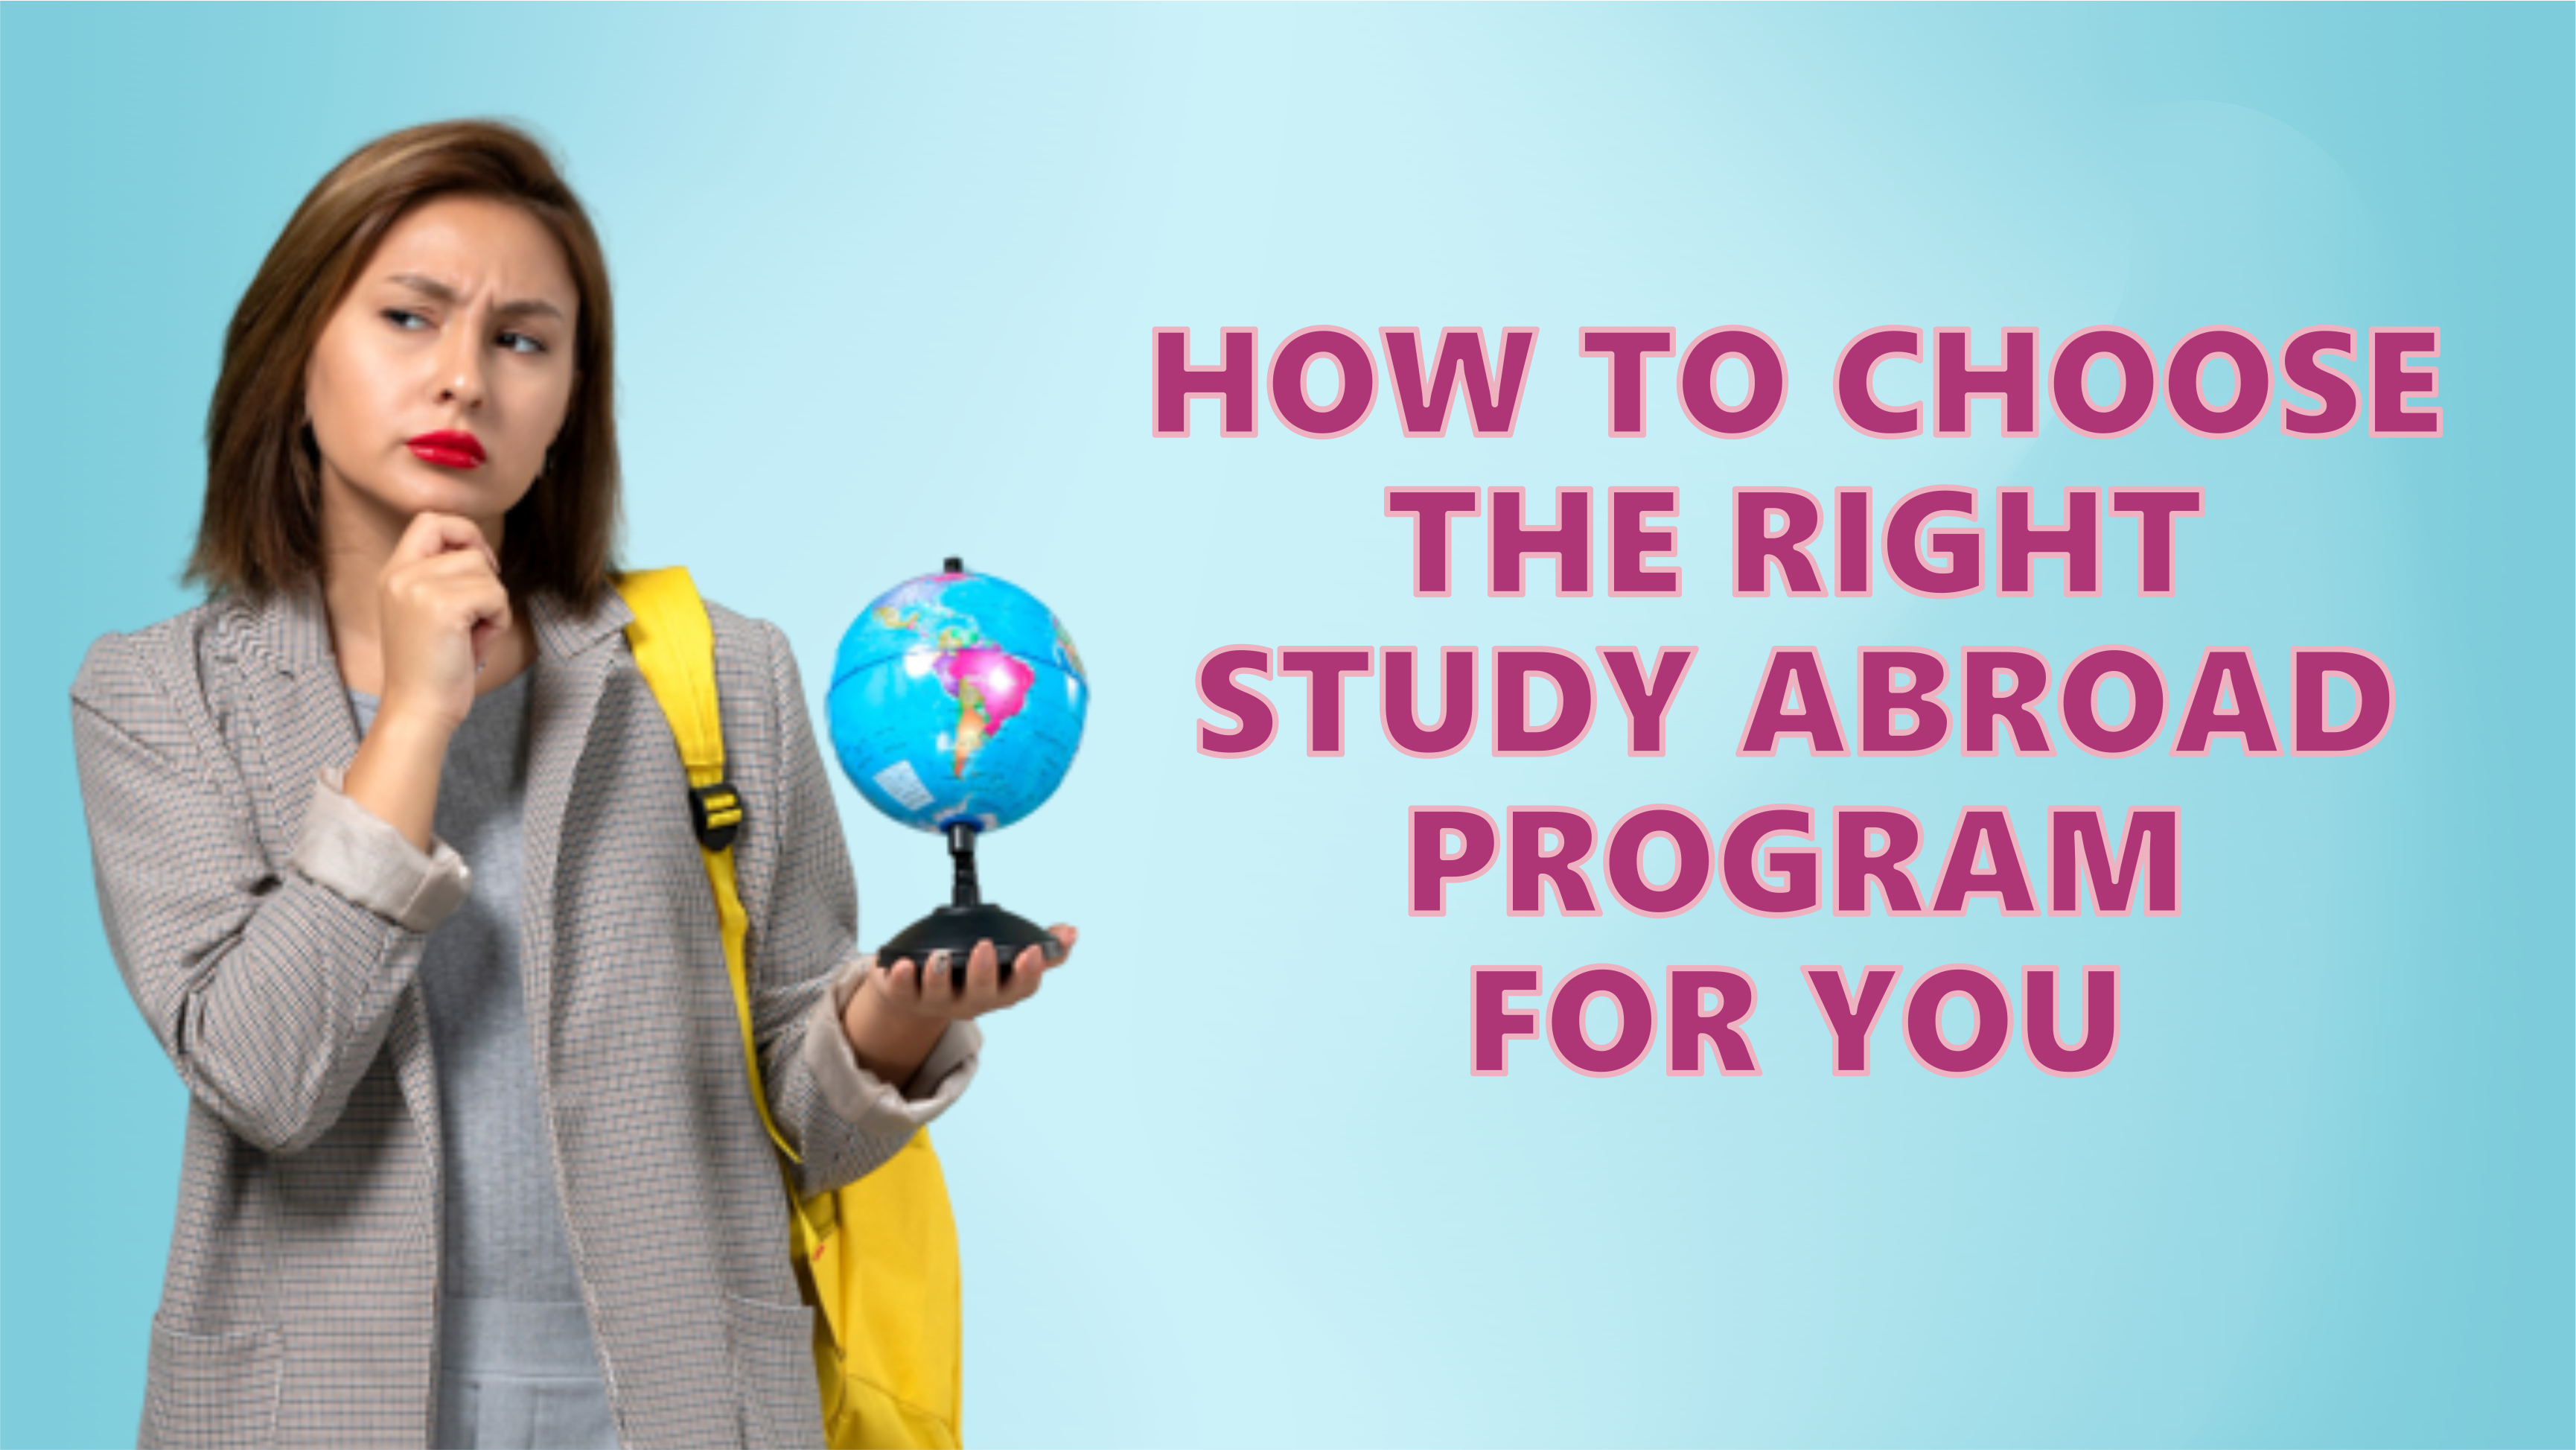 How to make the most of your study abroad experience